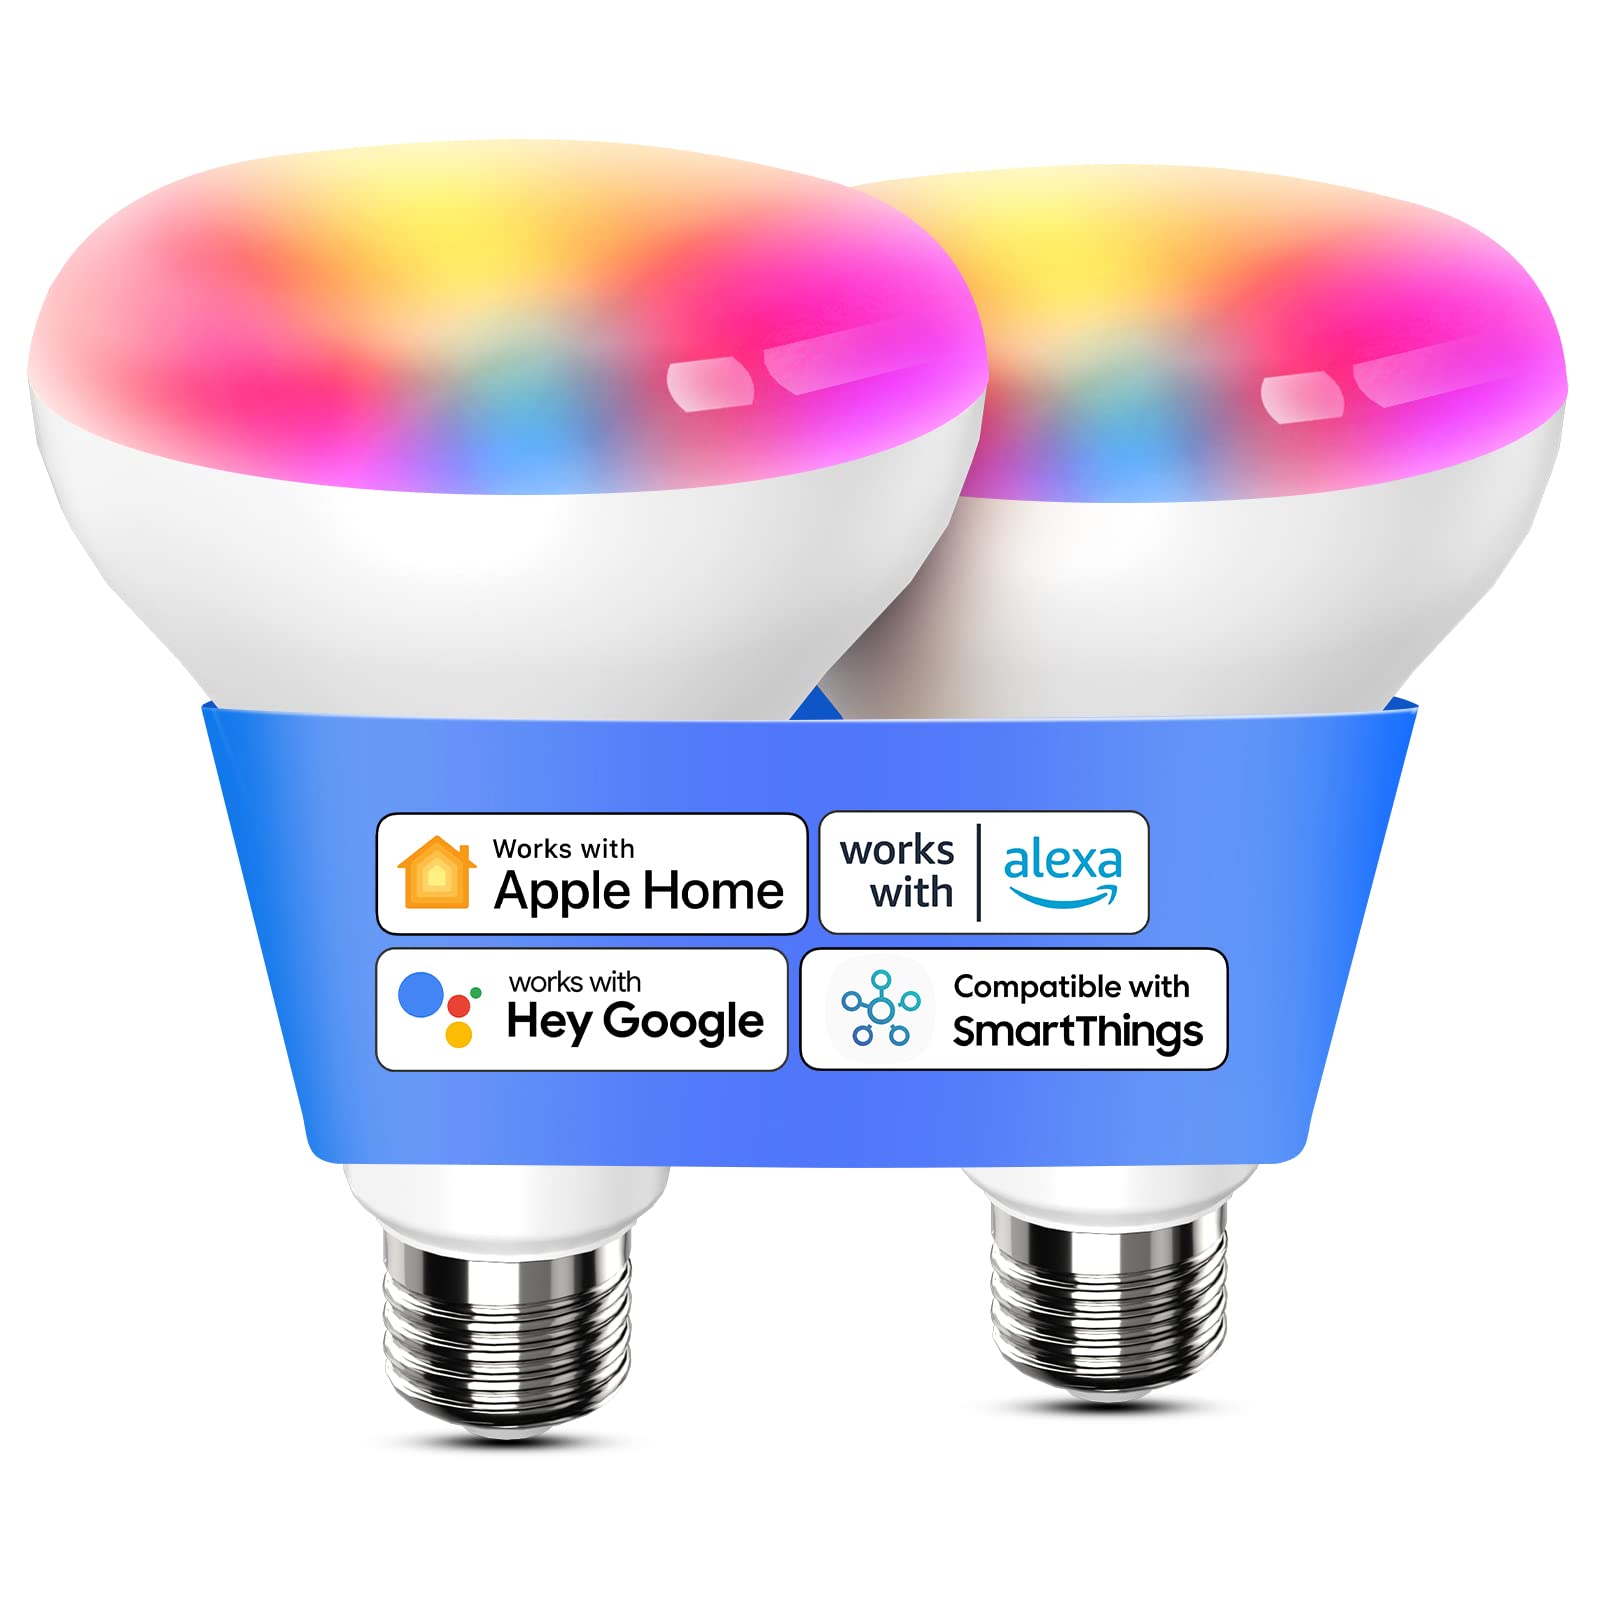 meross Smart Light Bulb, BR30 WiFi Flood LED Bulbs Support Apple Homekit, Siri, Alexa & Google Assistant, Full Color Changing RGBCW Dimmable 1300 Lumens 100W Equivalent, 2 Pack